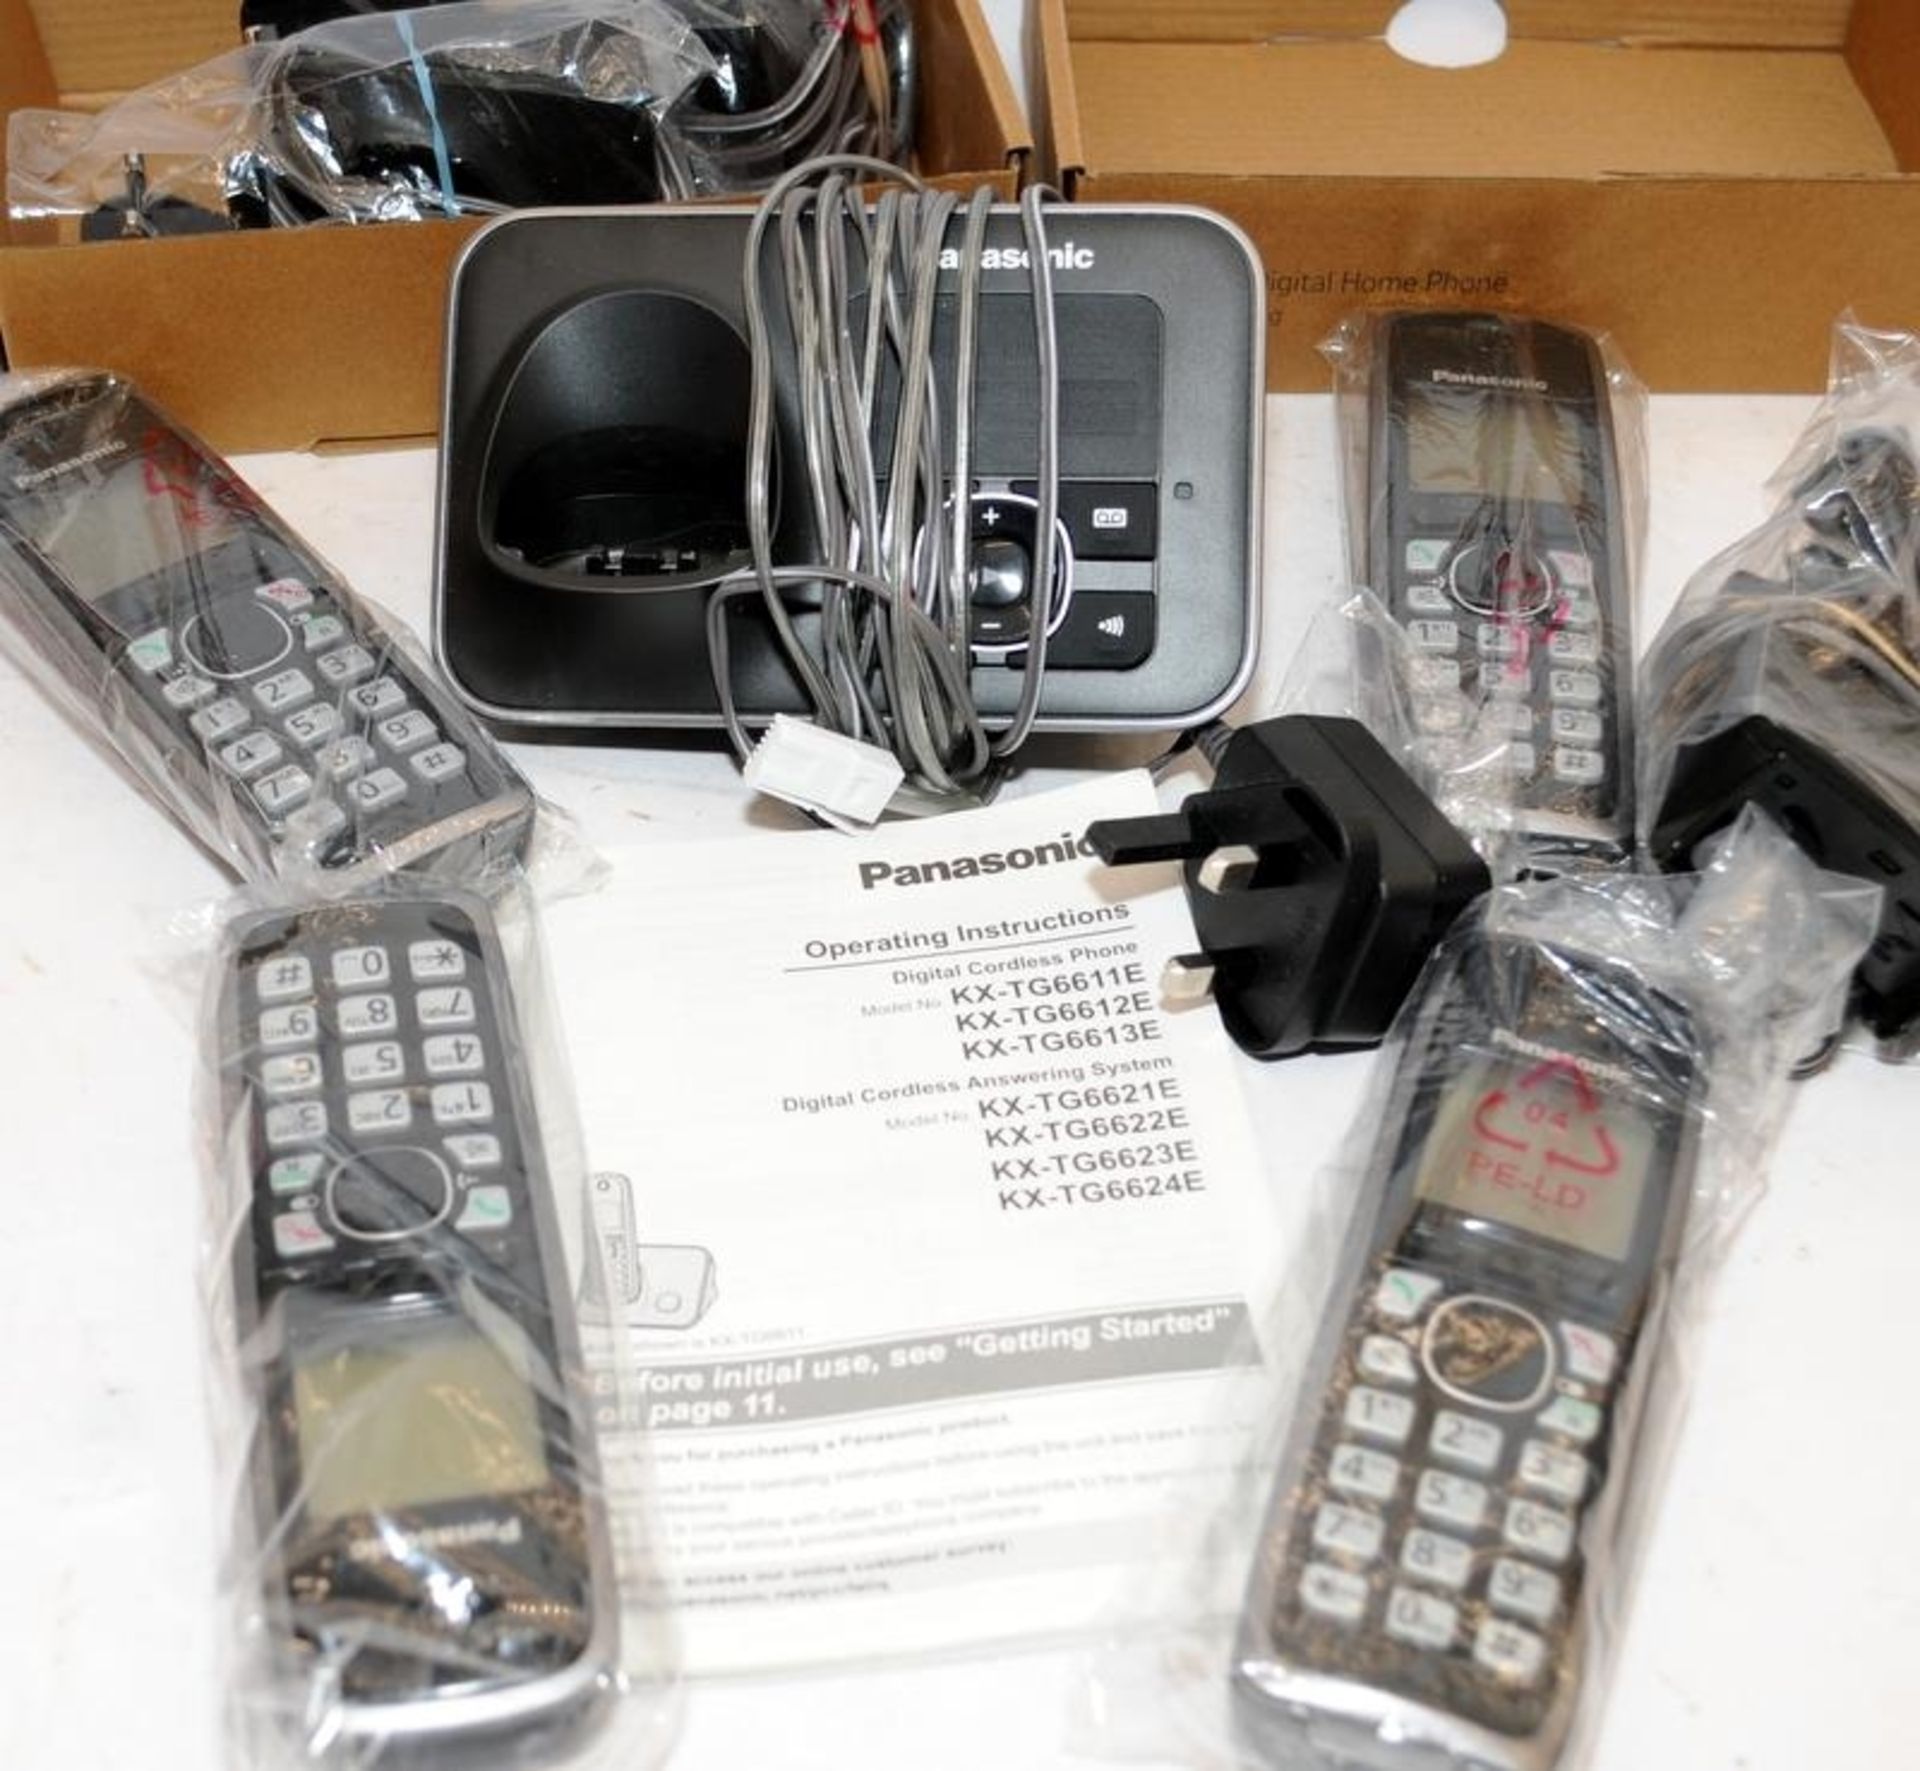 Panasonic digital cordless answering system four phones with instructions all working - Image 2 of 2